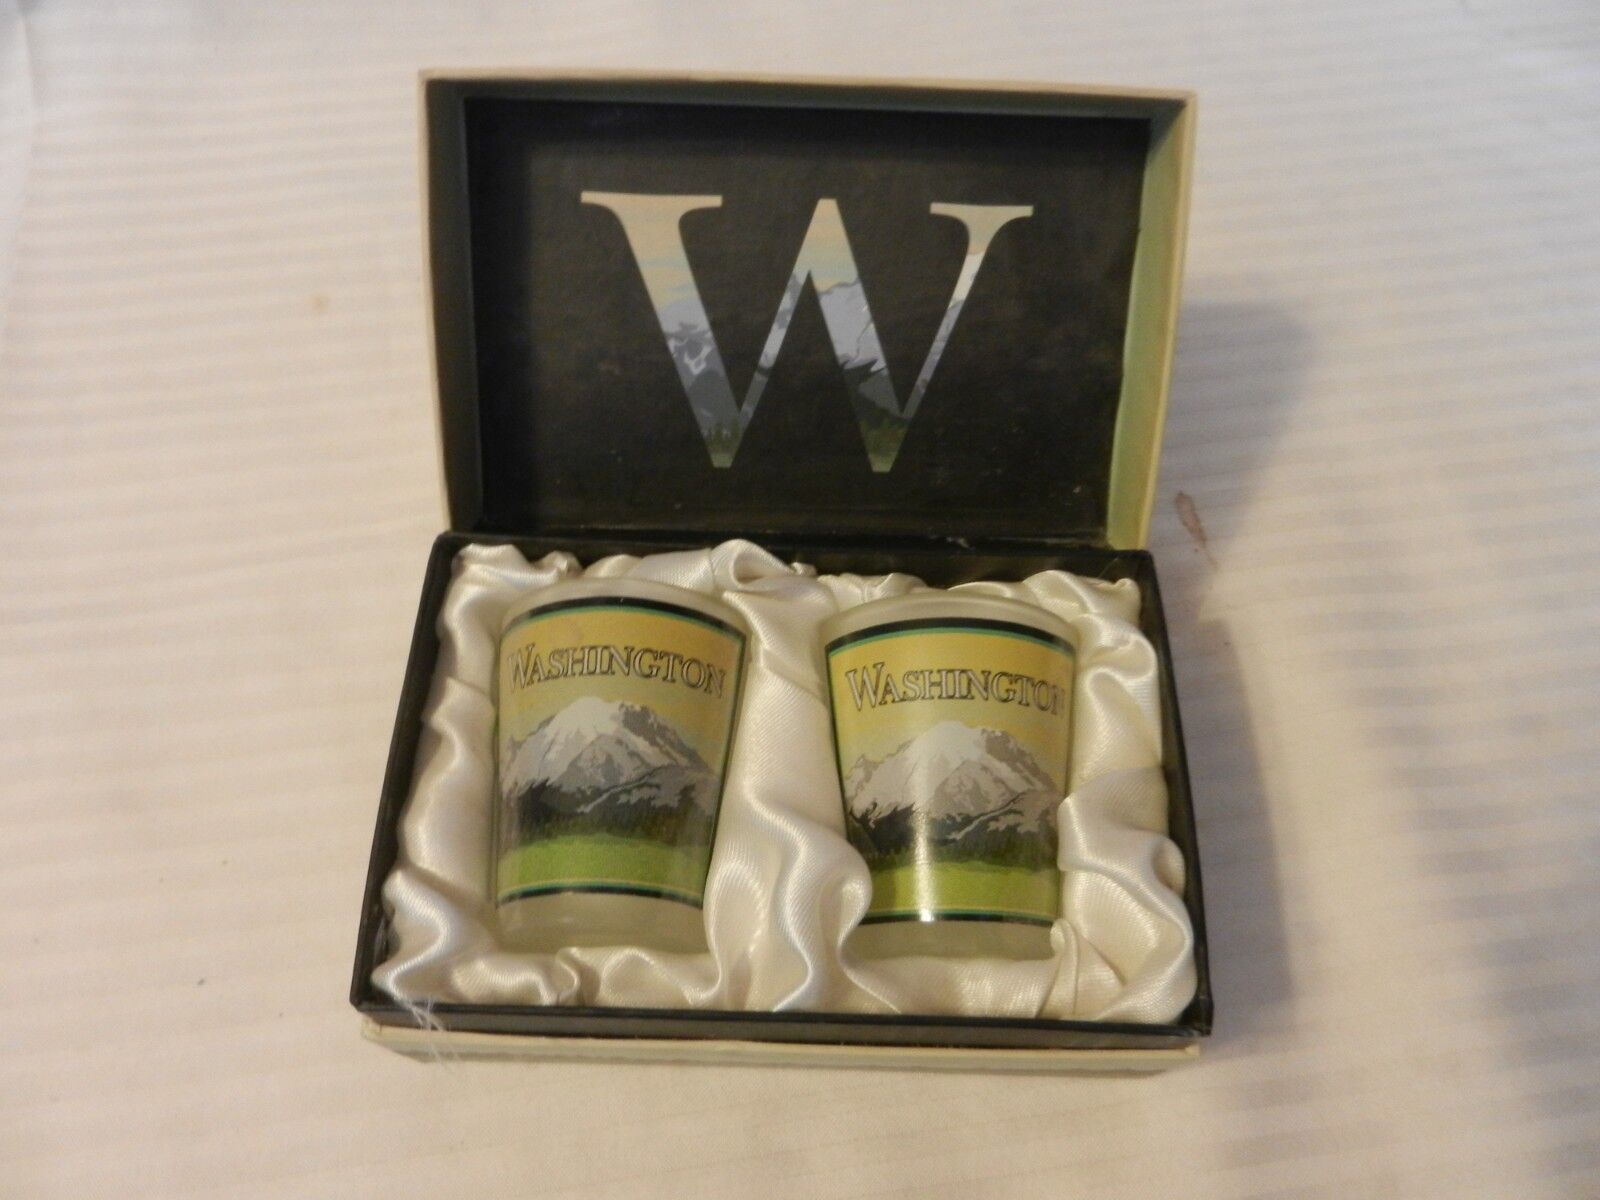 Primary image for Pair of Washington State Shot Glasses Mountain Views Brand New in Box